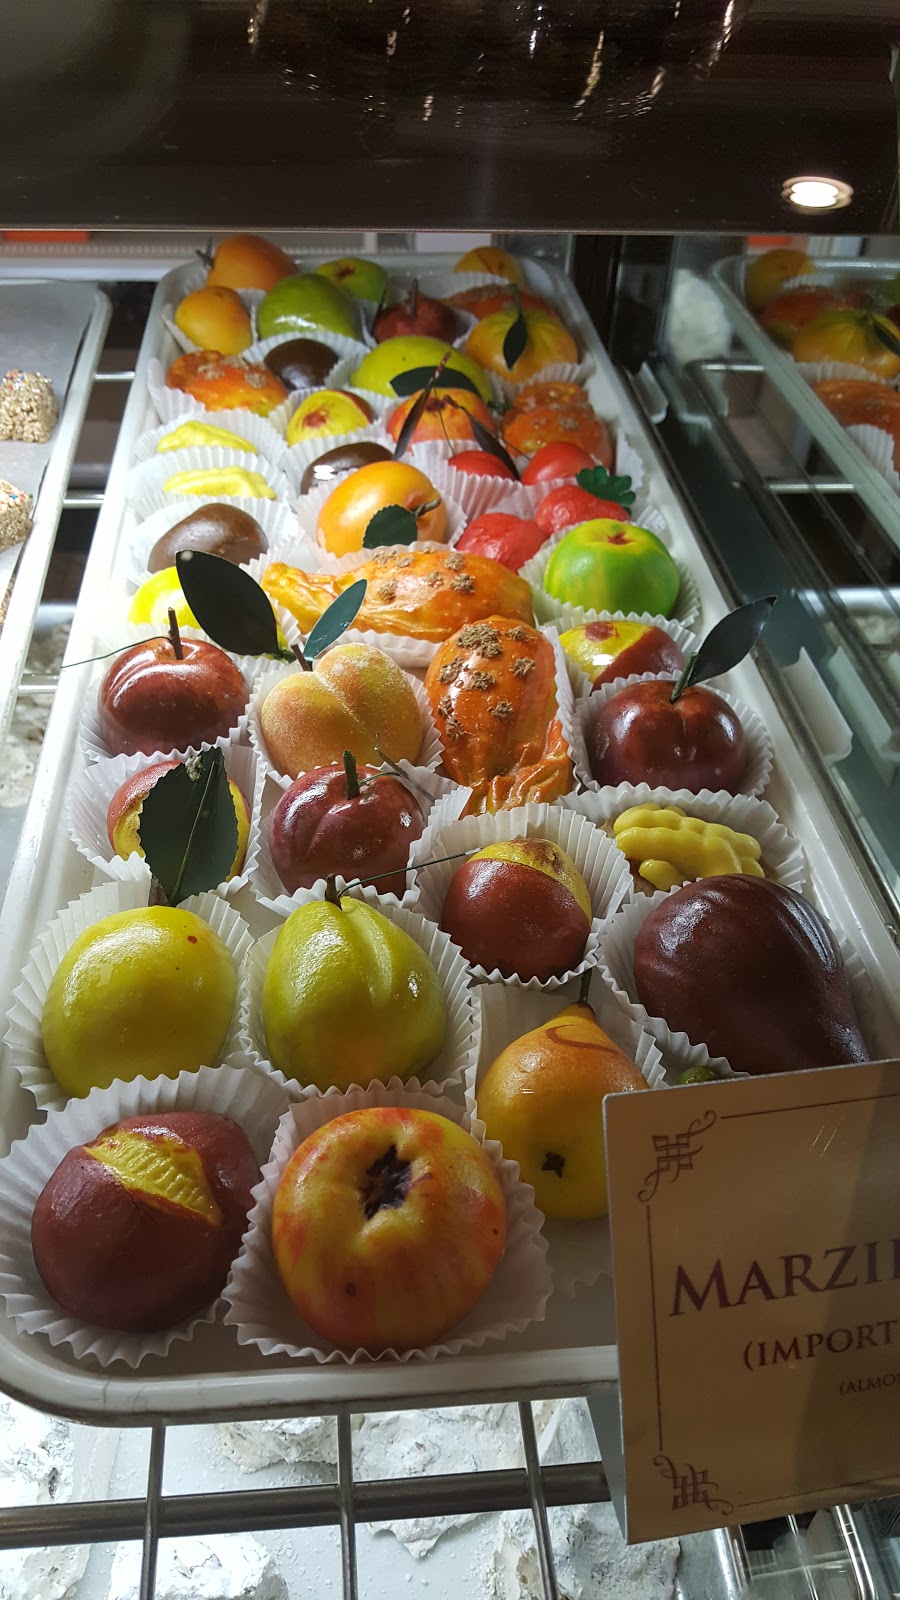 Mozzicato DePasquale Bakery and Pastry Shop | 125 New Britain Ave, Plainville, CT 06062 | Phone: (860) 793-2253